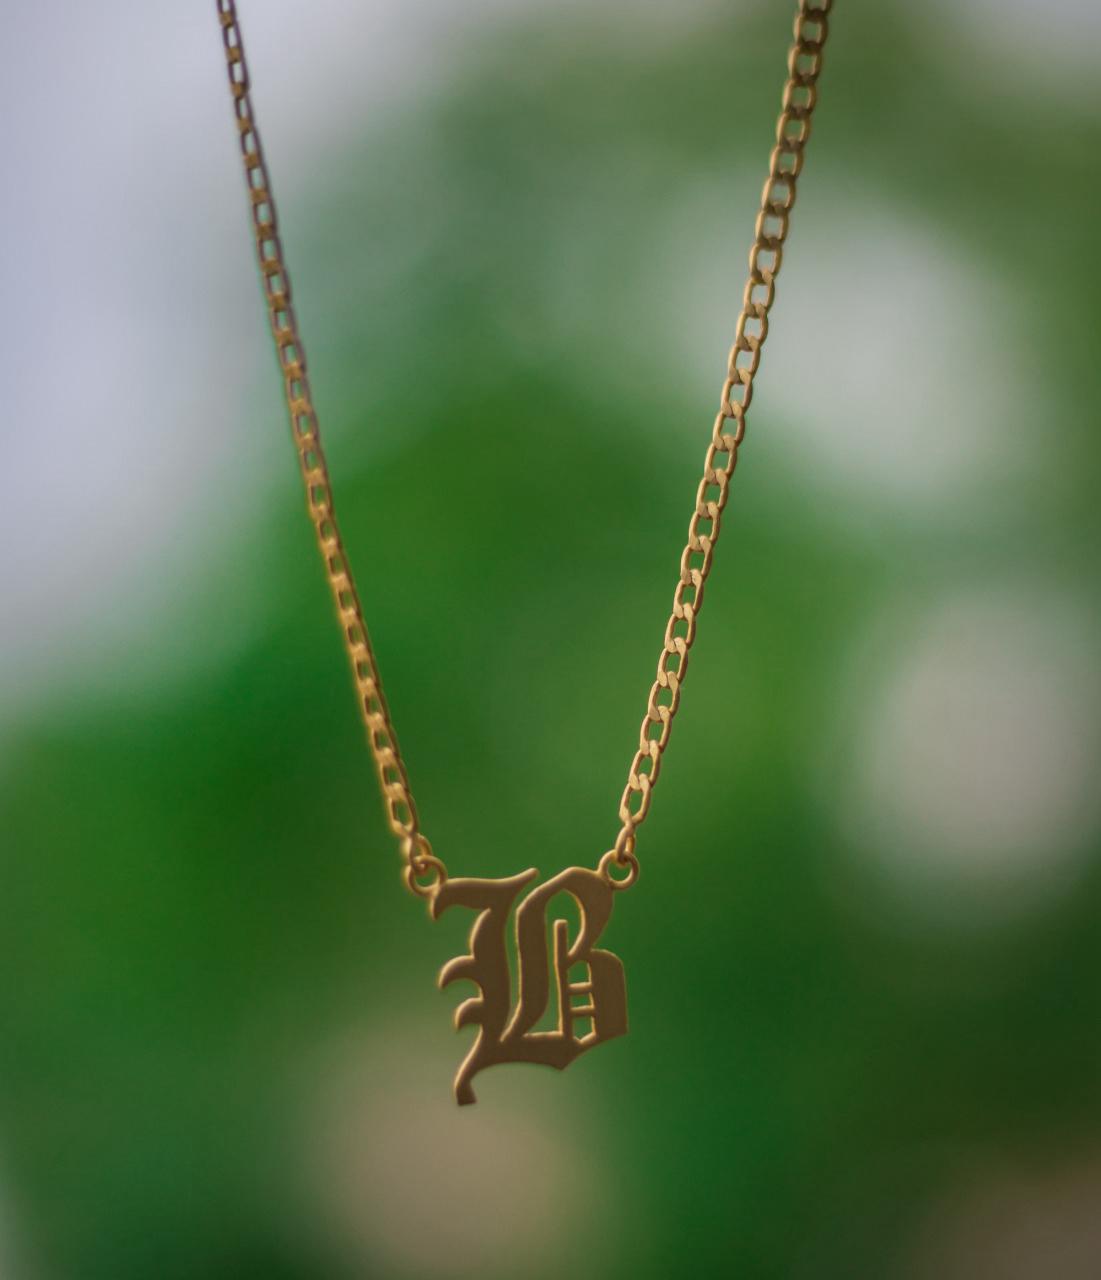 92.5 Sterling Silver hand-made 18k Micron Gold plating Personalized pendant.